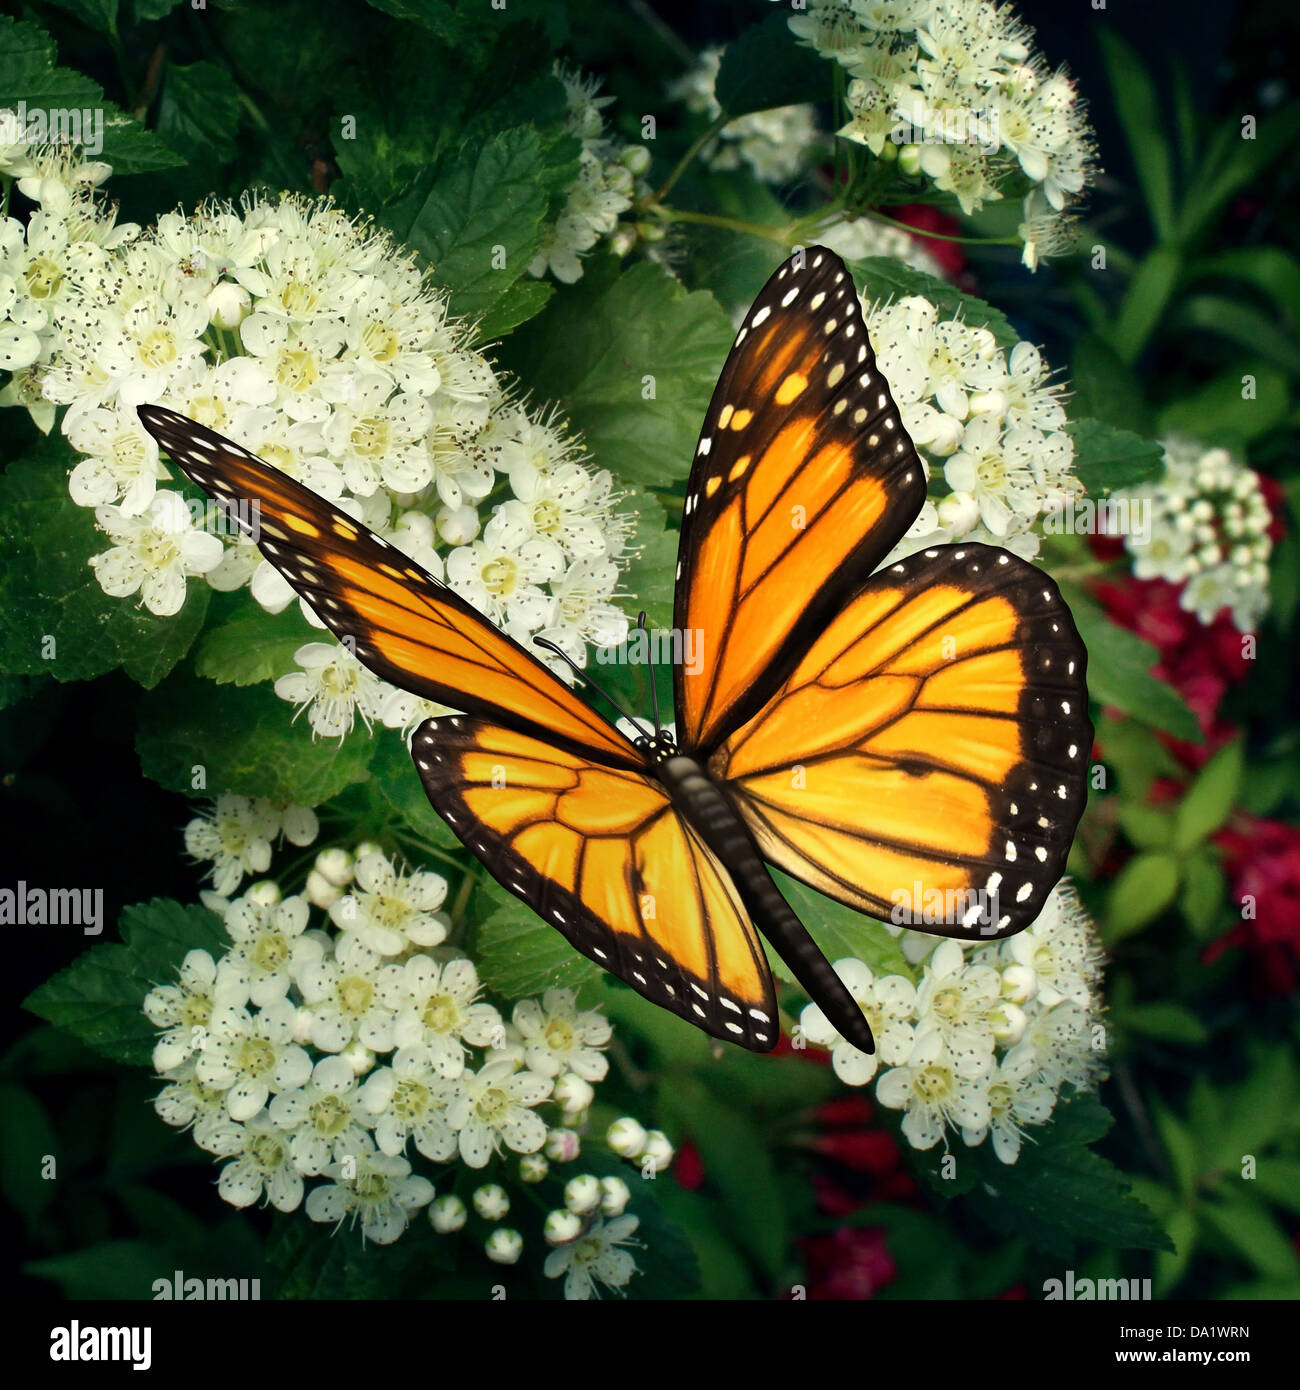 Butterfly on flowers as a monarch pollinator on white blooming outdoor plant pollinating and feeding off the flower nectar moving pollen in a natural function as a symbol of nature and healthy environment. Stock Photo